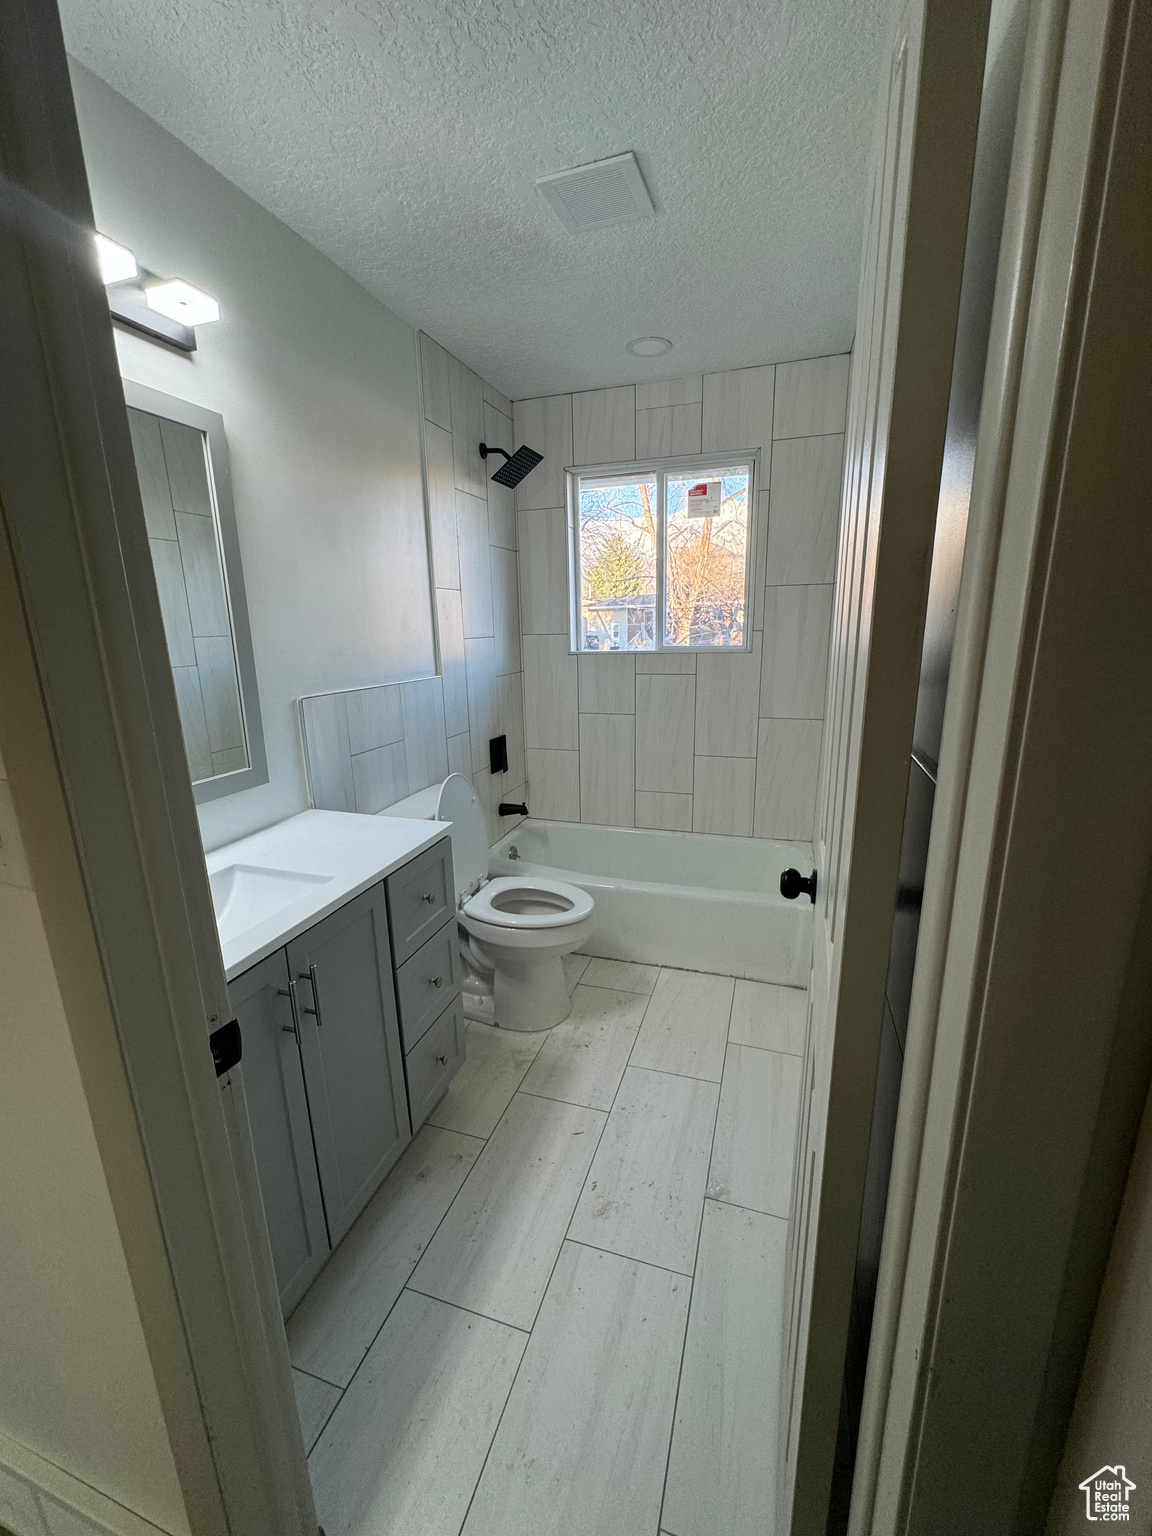 Full bathroom featuring vanity, tiled shower / bath, tile flooring, a textured ceiling, and toilet